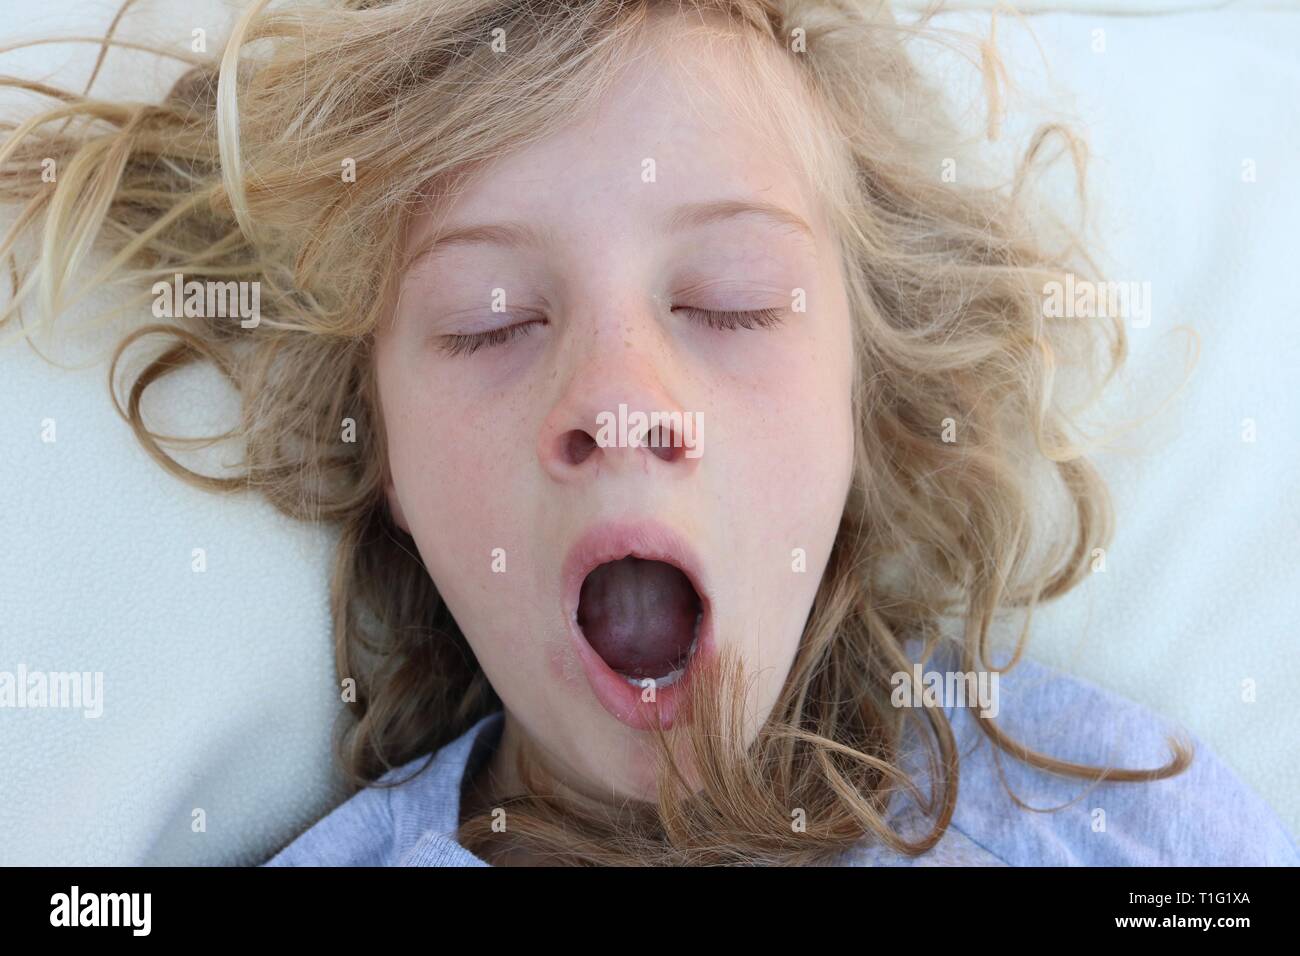 Girl with unruly blonde curls yawning and waking up with her eyes closed Stock Photo